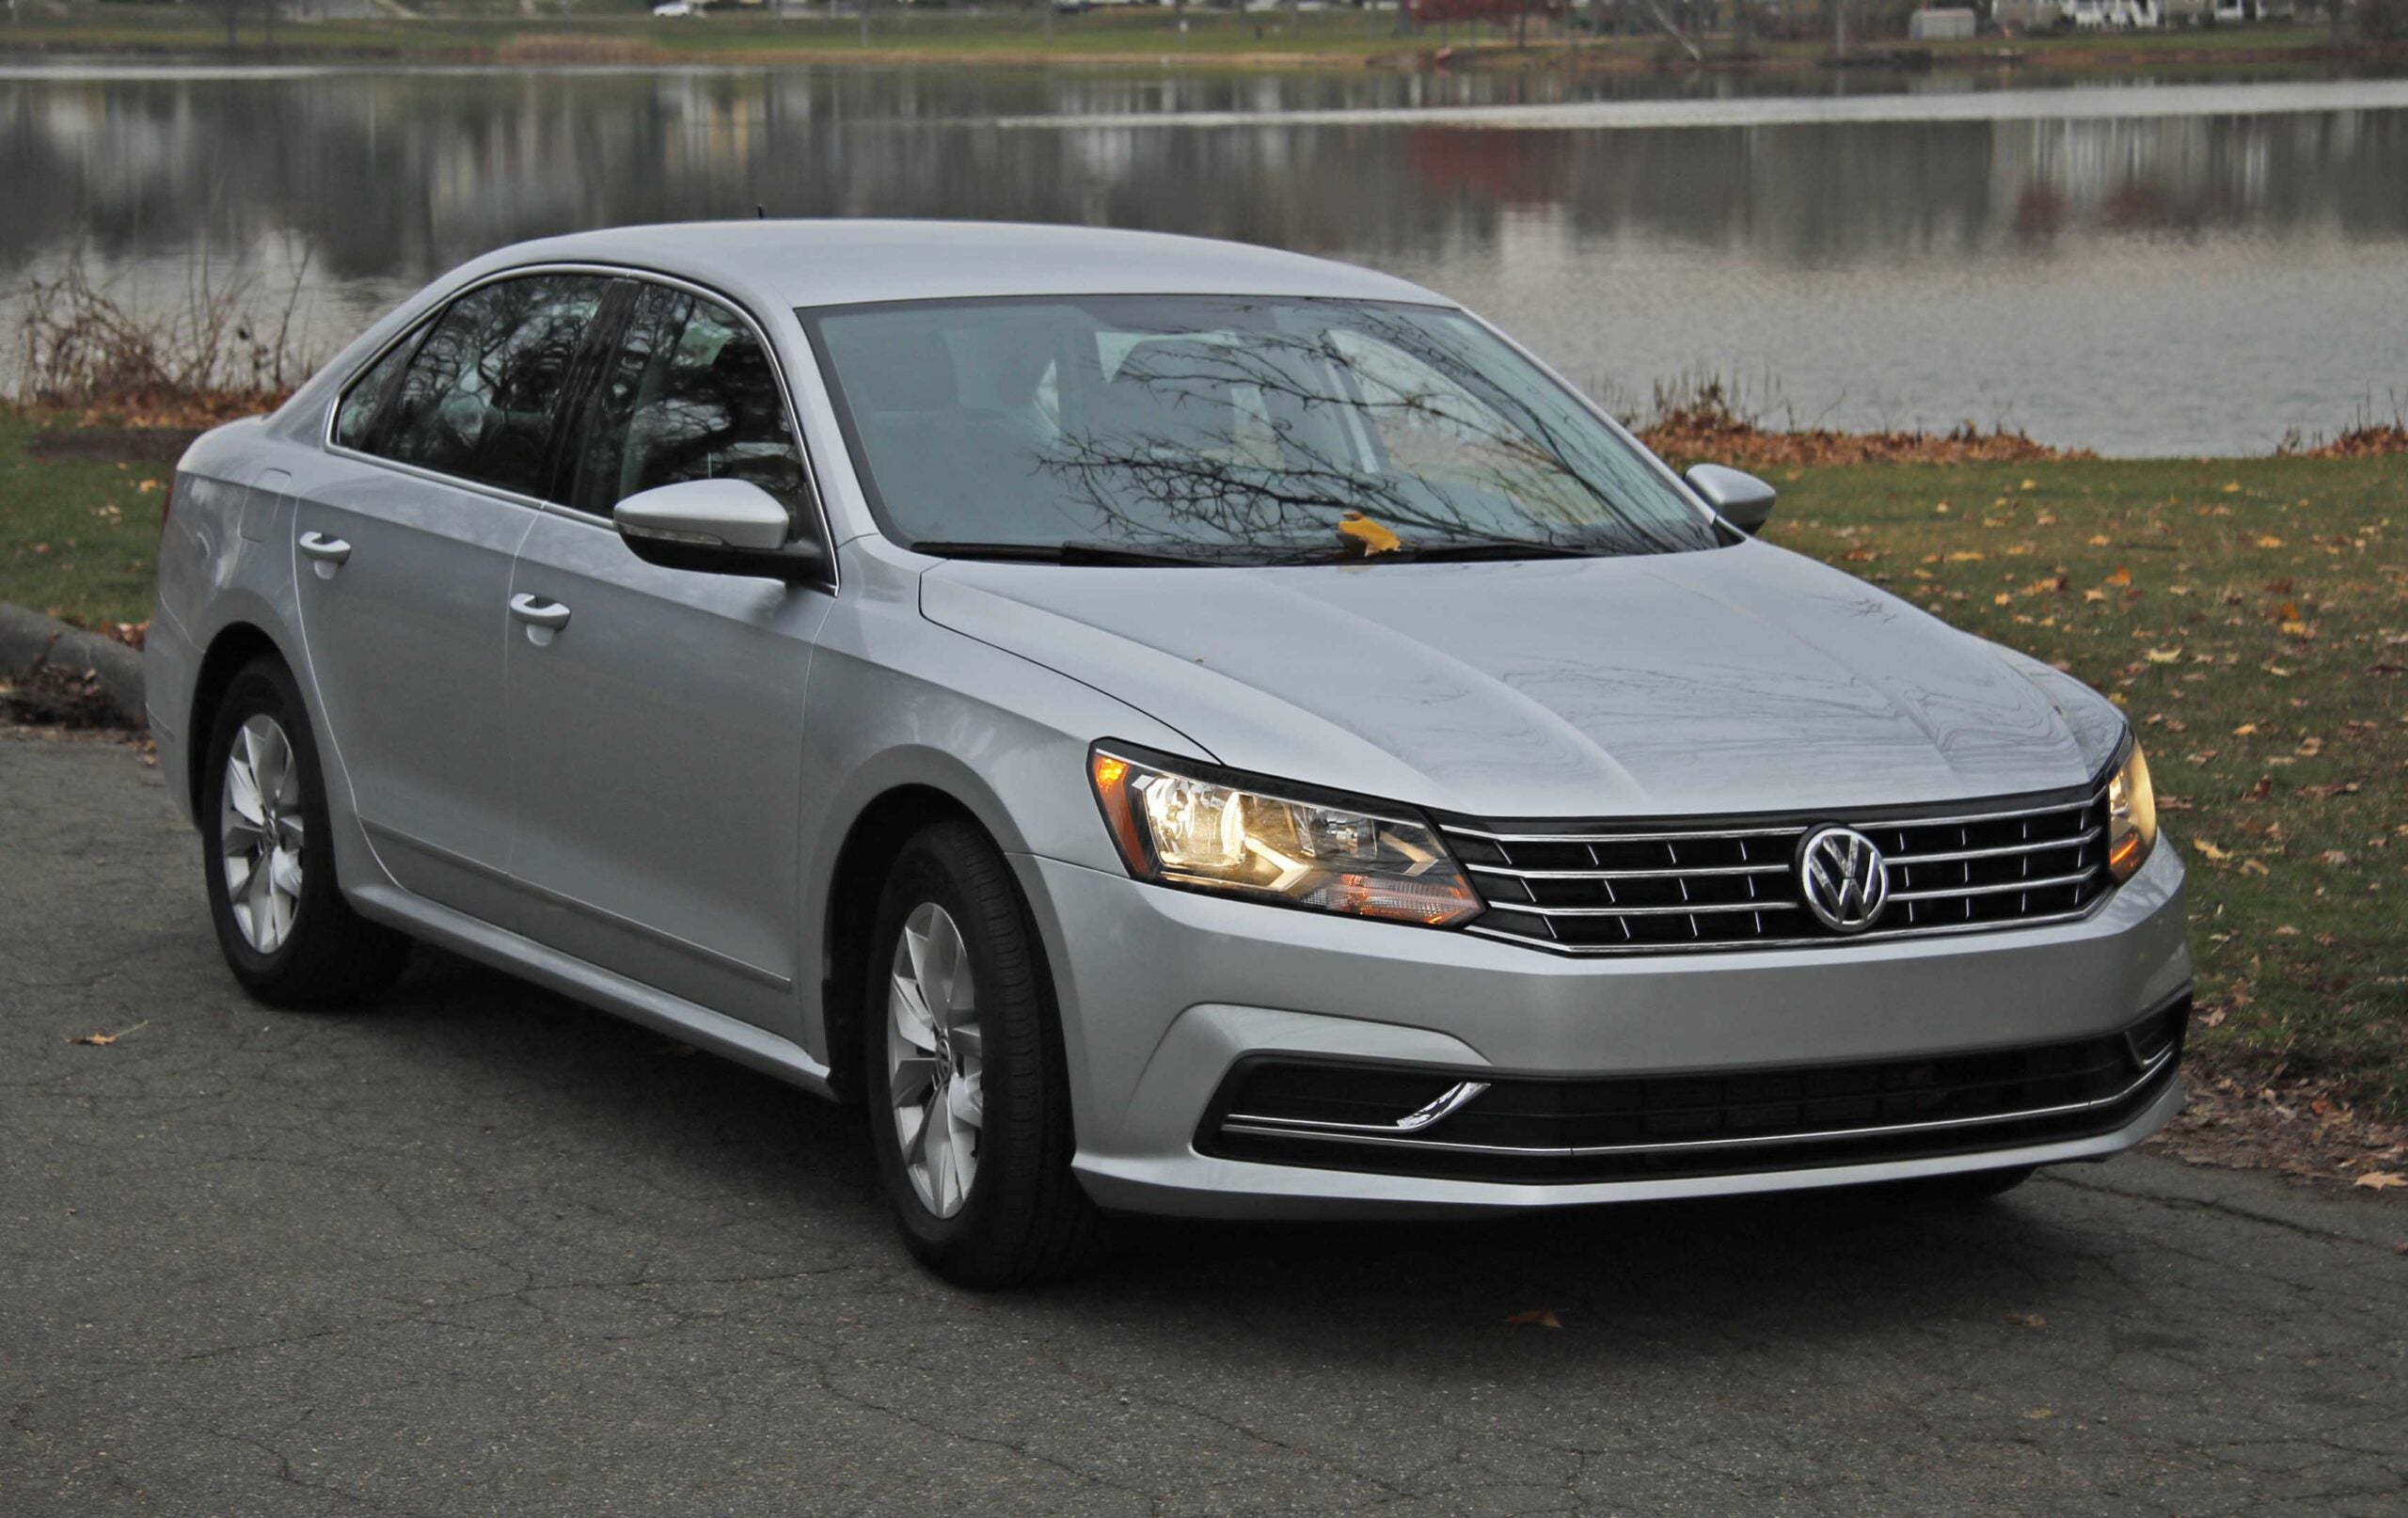 Review: 2016 VW Passat 1.8T S has style without the extras